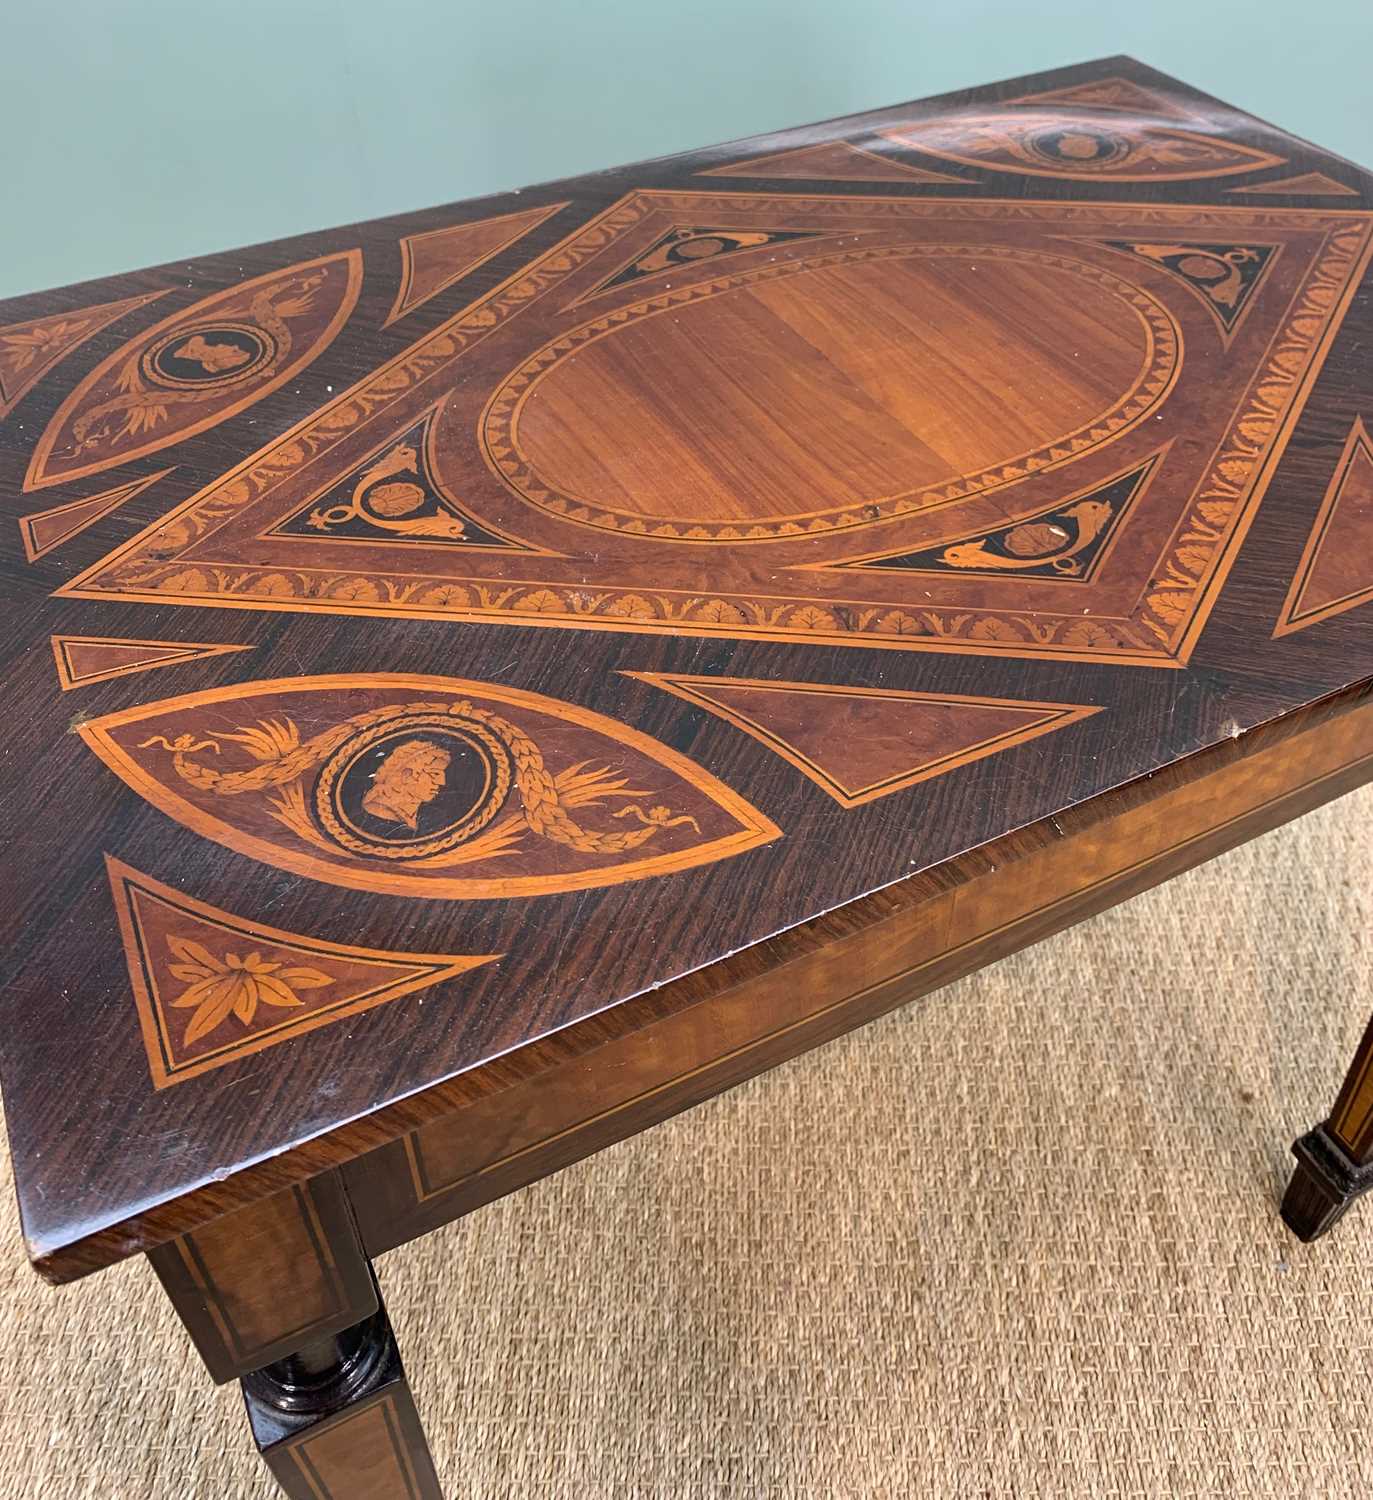 OCCASIONAL FURNITURE: comprising 20th C. Italian neoclassical marquetry side table, 74 (w) x - Image 3 of 6